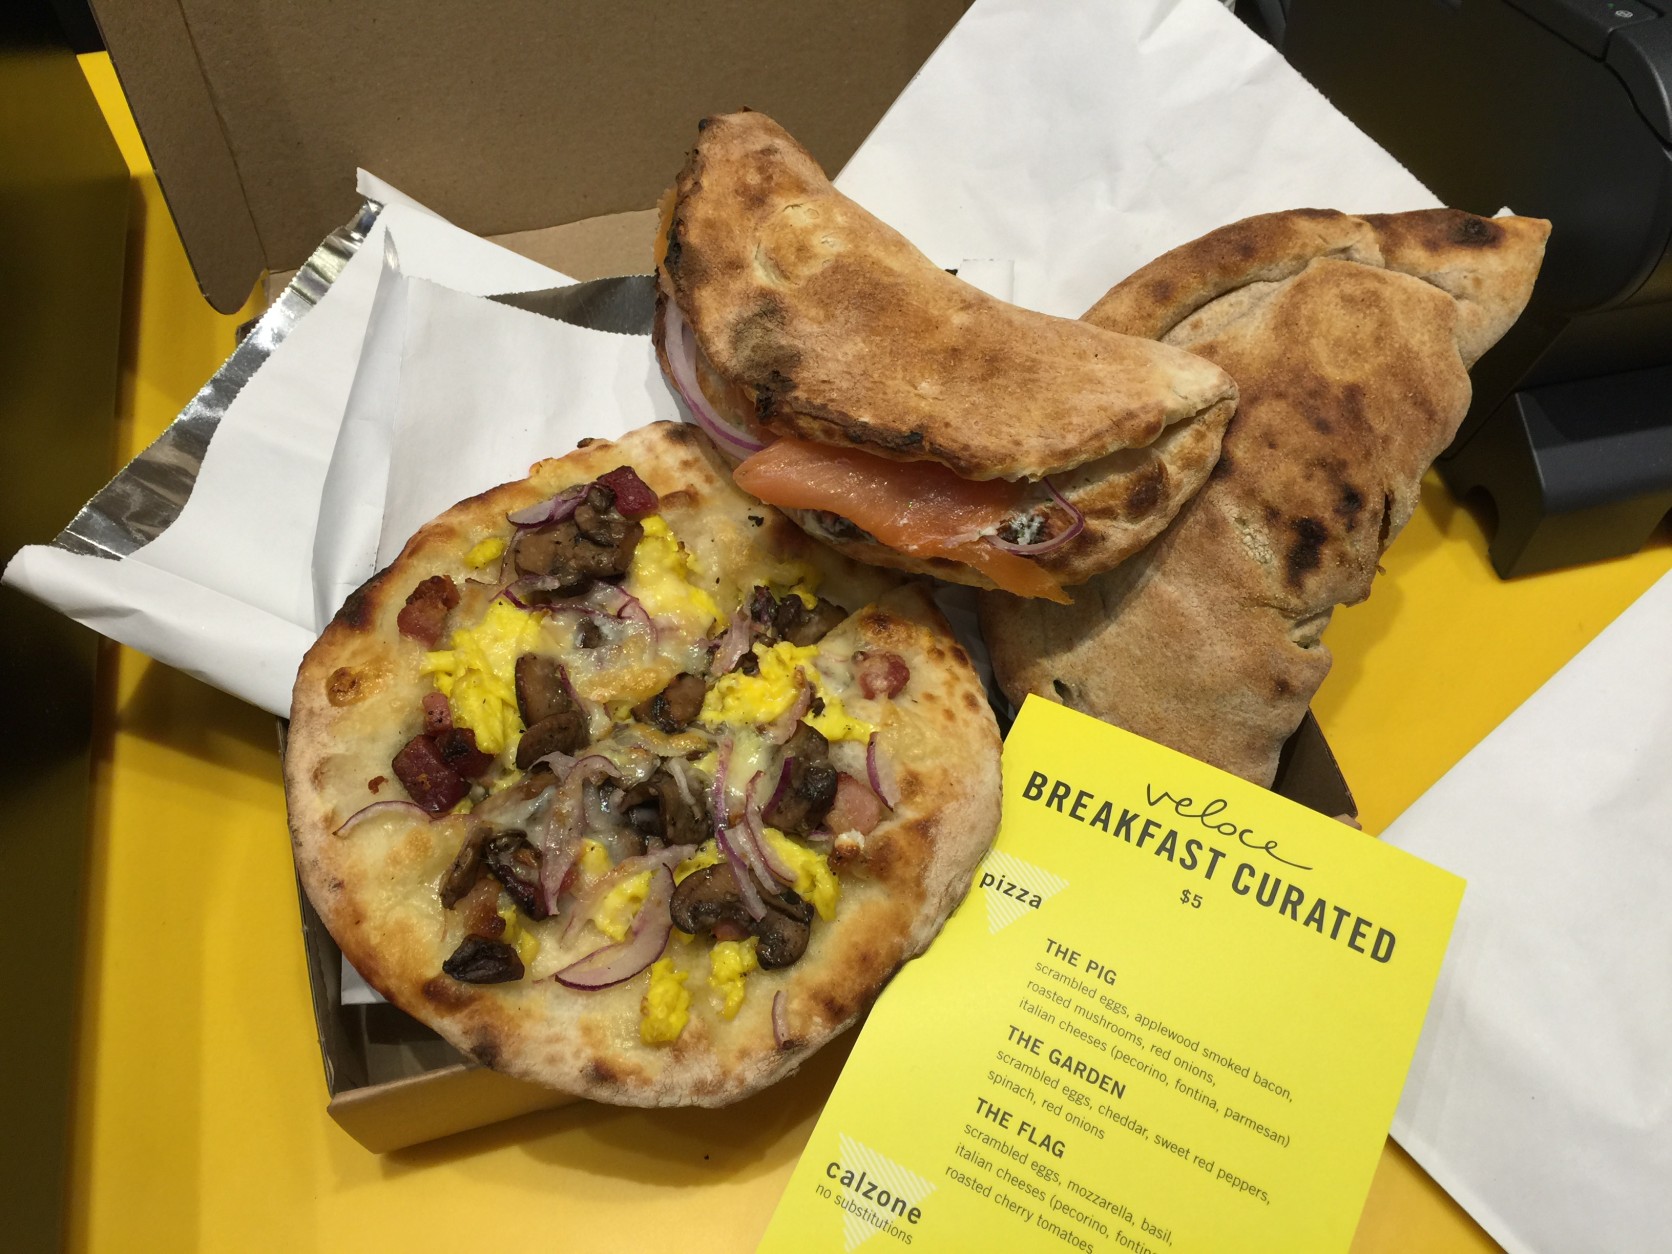 Some of the breakfast pizzas at Veloce. (WTOP/Kristi King)